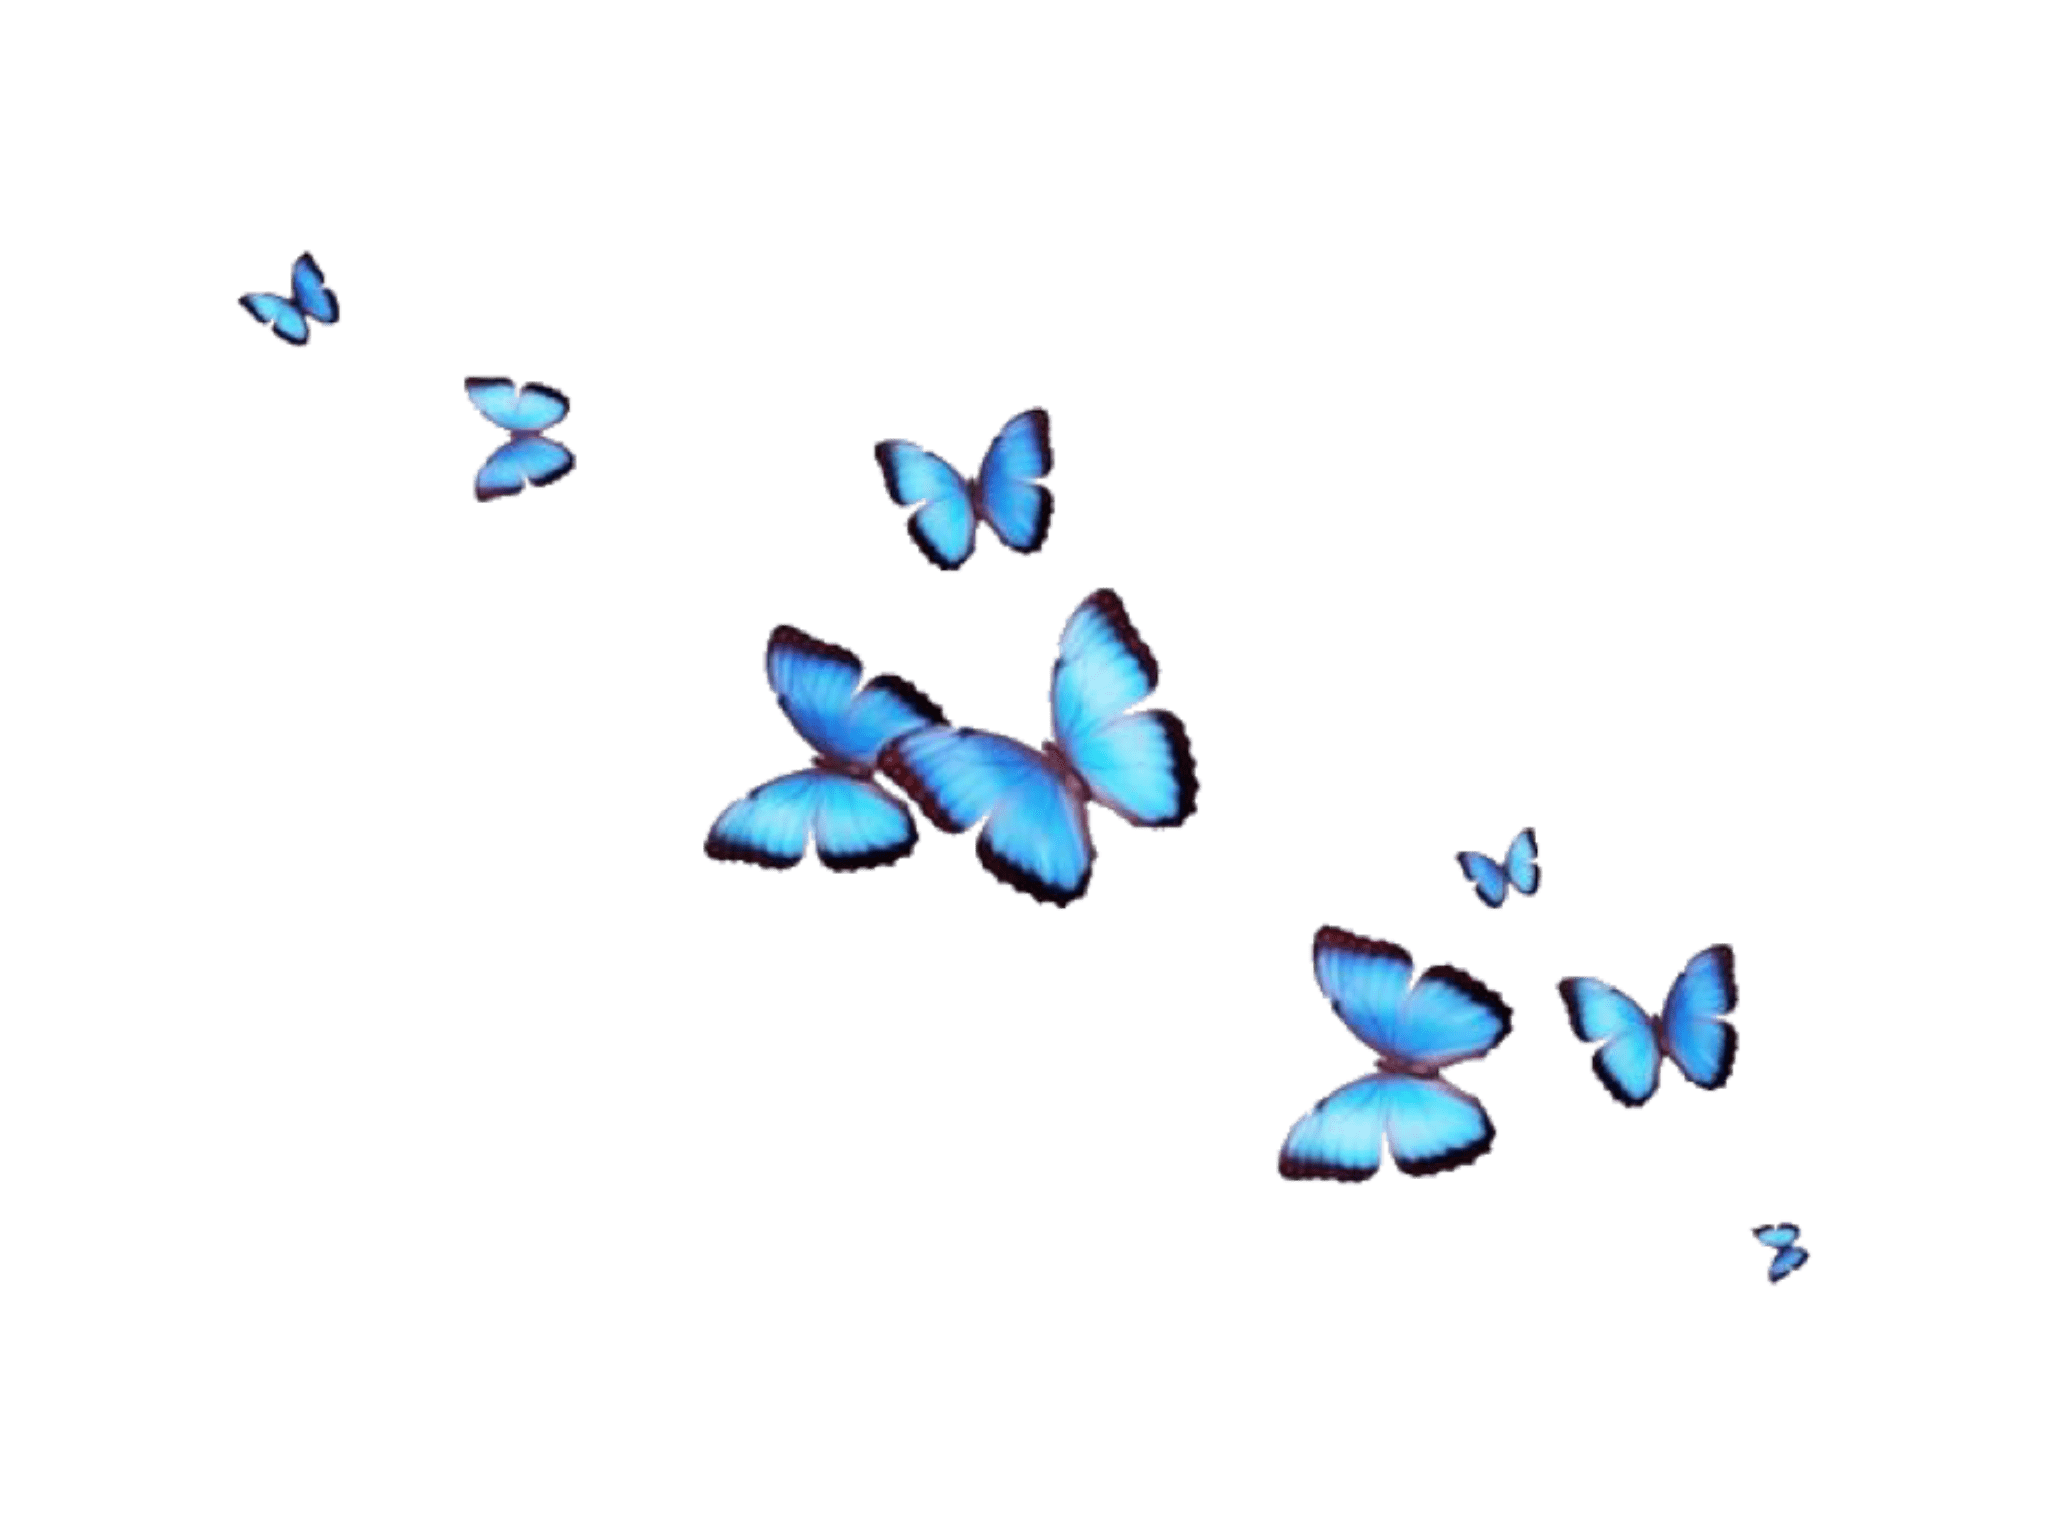 Transparent Butterfly Wallpapers - Top Free Transparent Butterfly ...